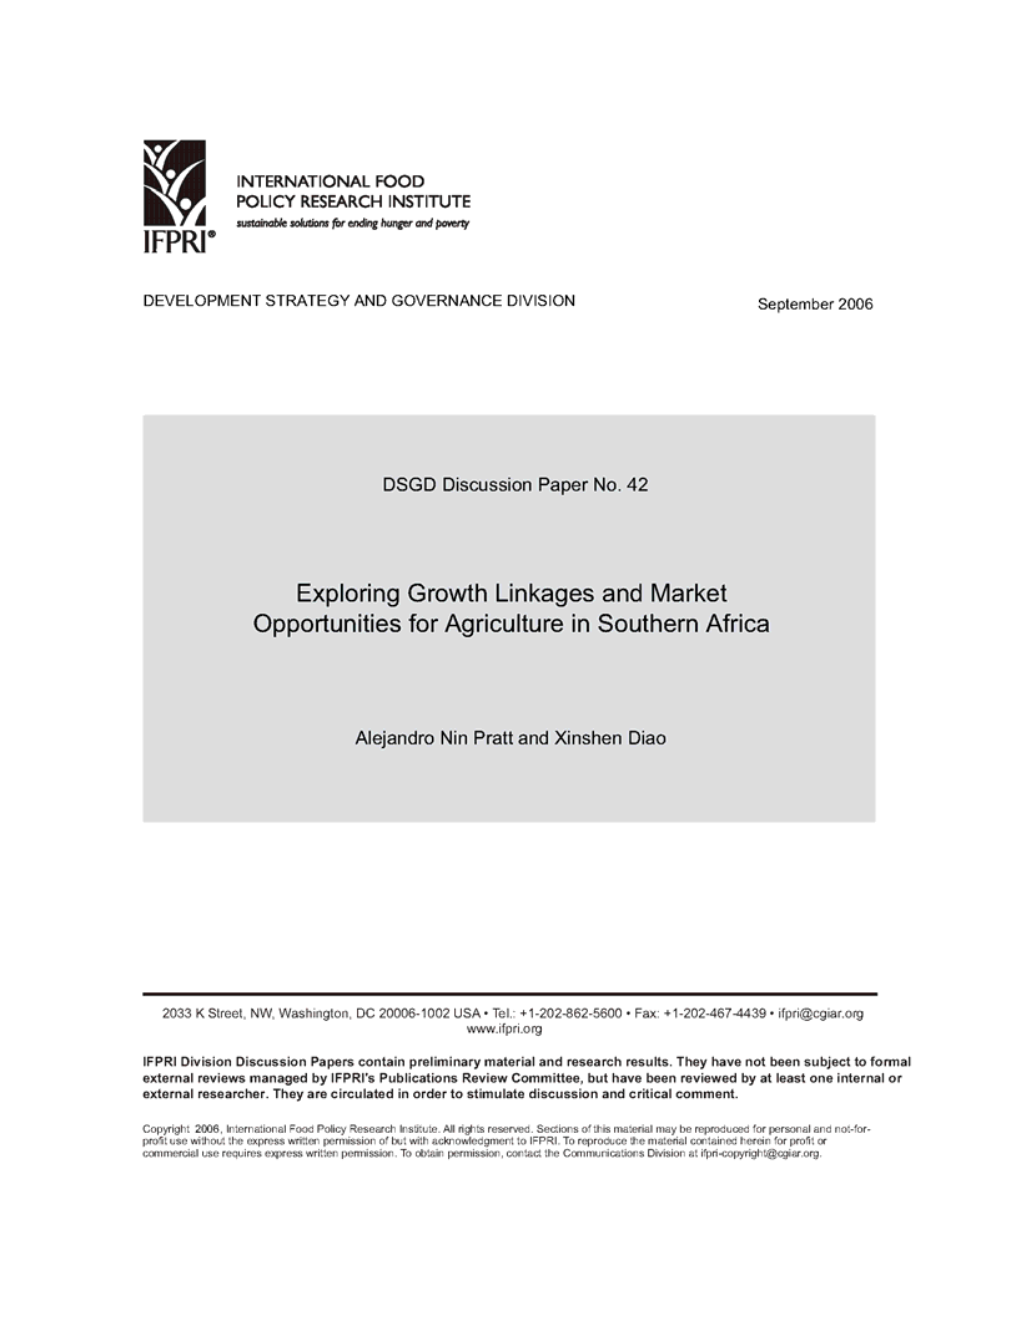 Exploring Growth Linkages and Market Opportunities for Agriculture in Southern Africa